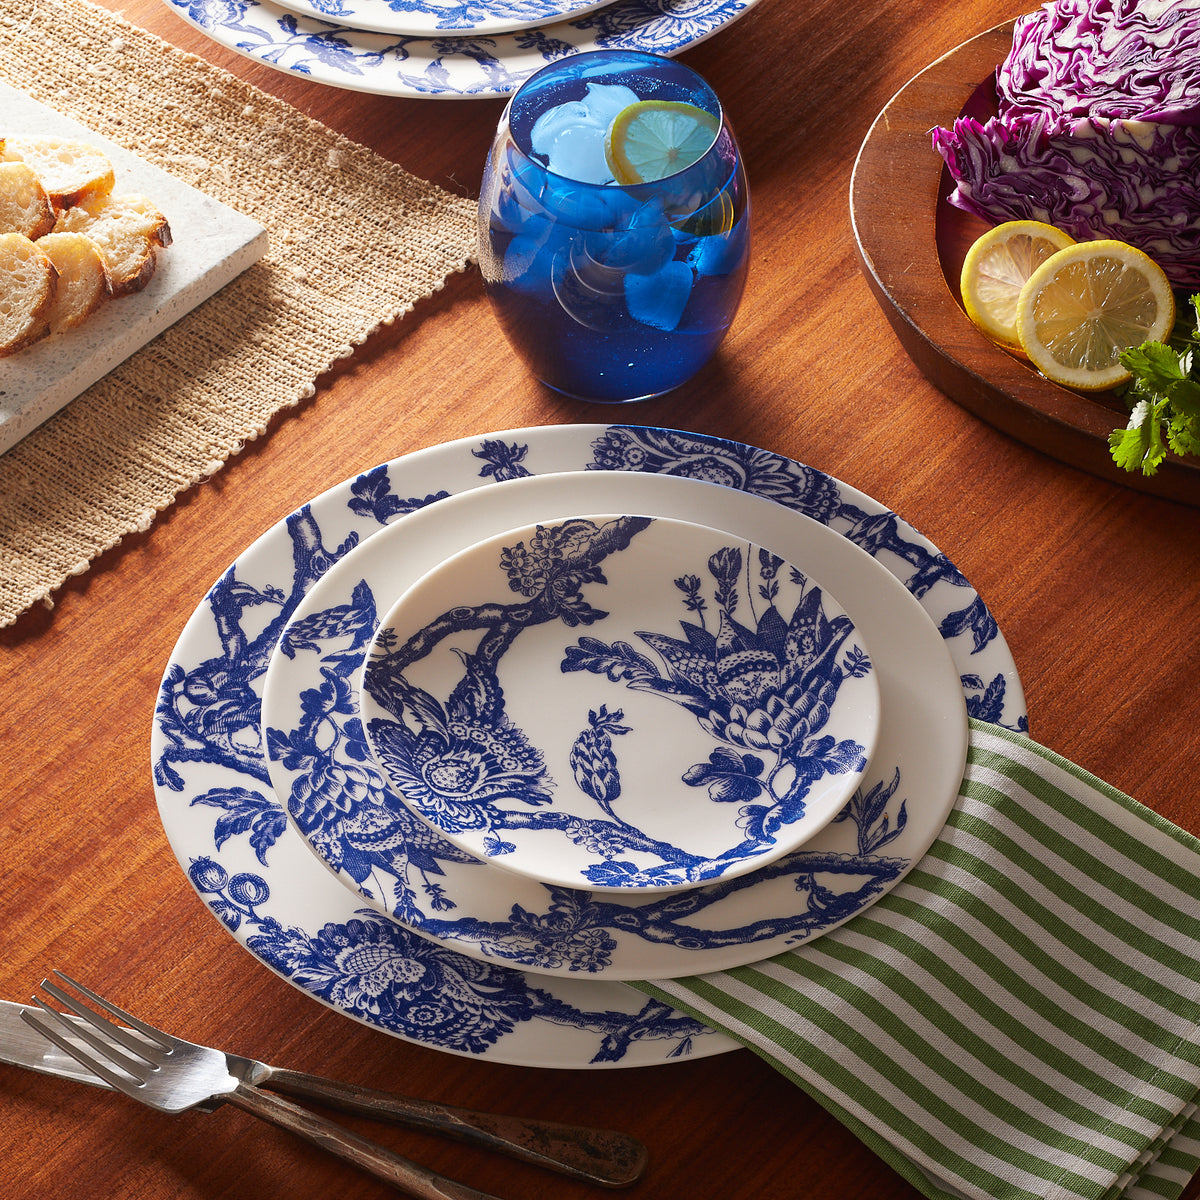 A Caskata Artisanal Home Arcadia salad plate, decorated with blue and white floral designs, placed on a wooden table.